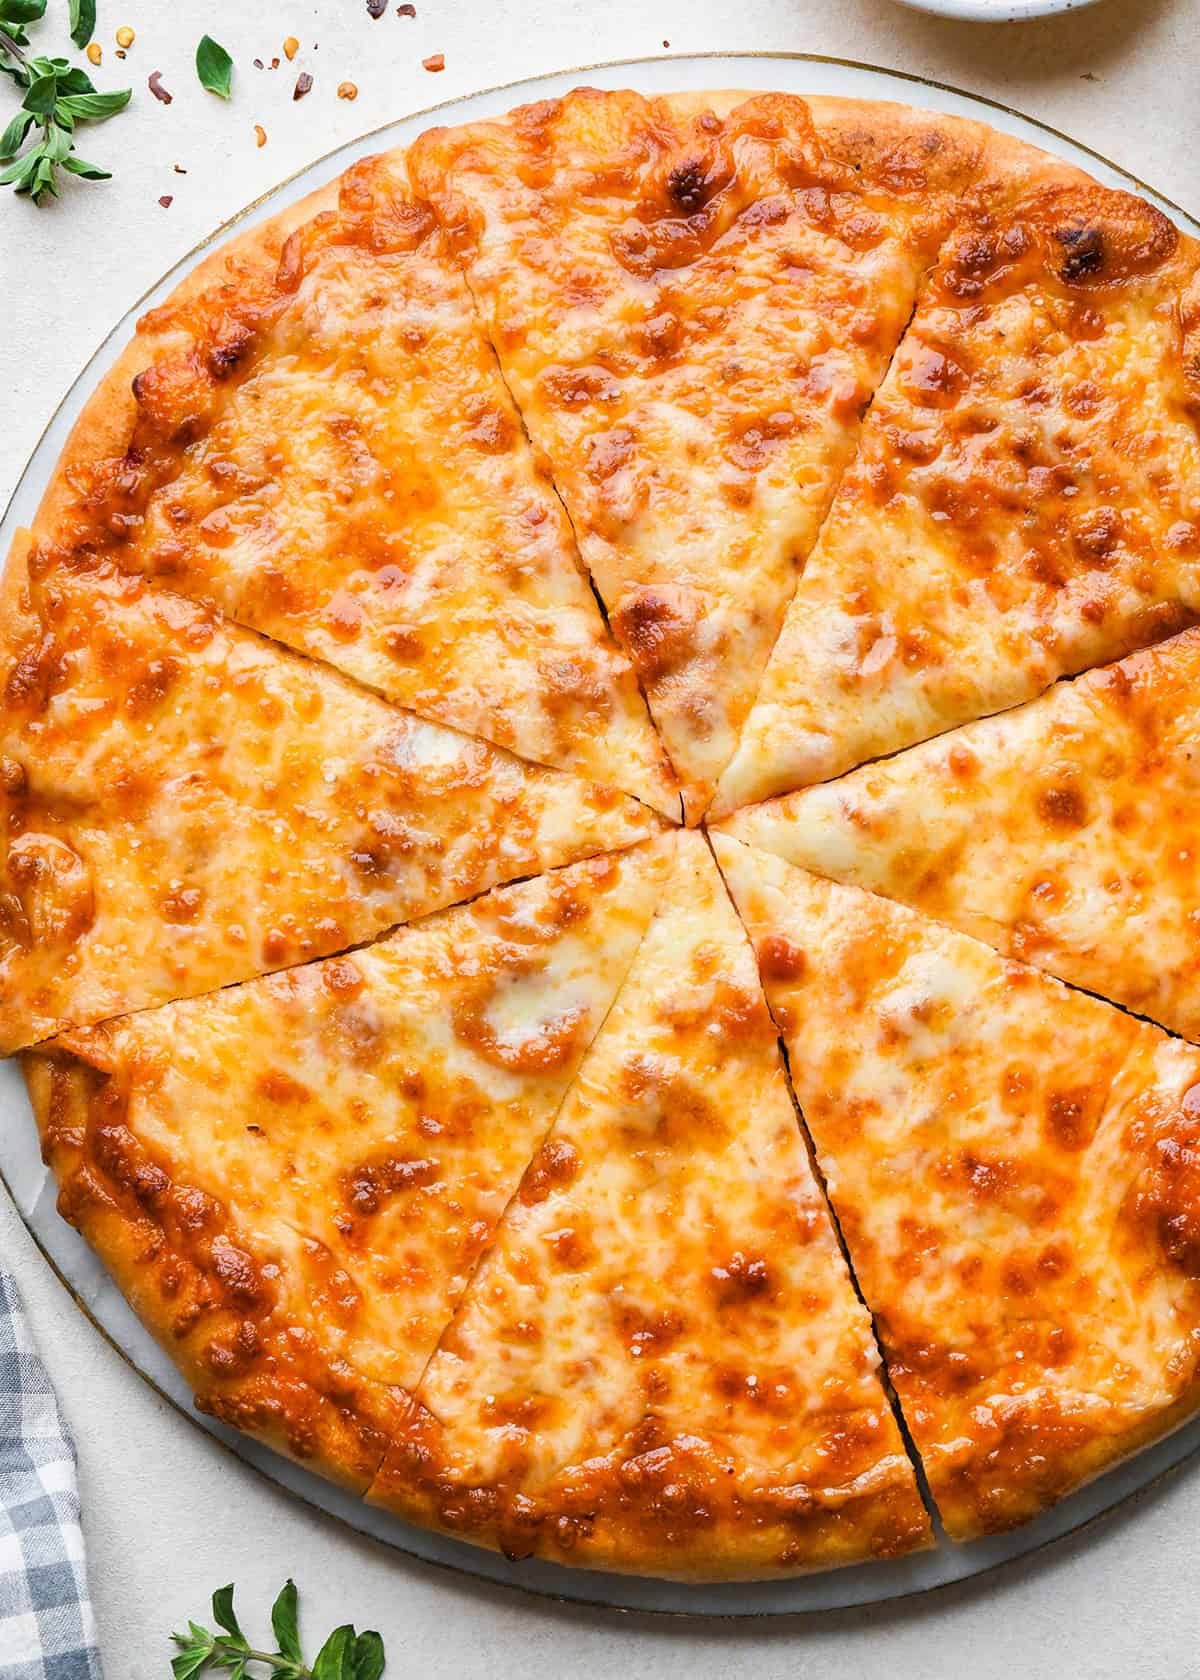 Cheese Pizza cut into 8 slices